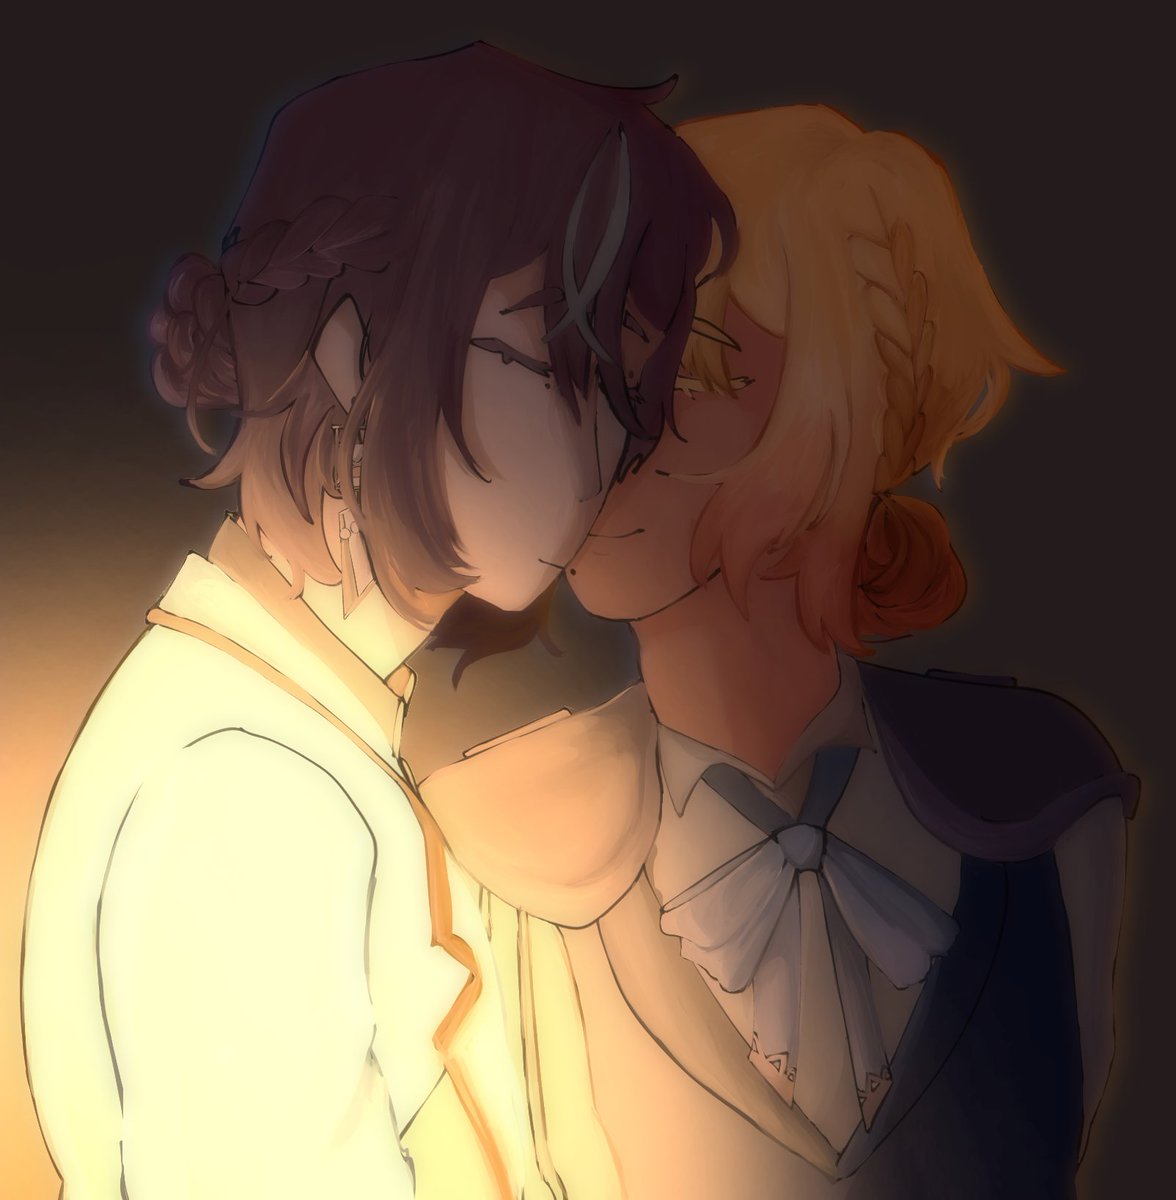 Kiss by the candlelight  🎈🌟 #Prsk_FA #prsk_BL #類司